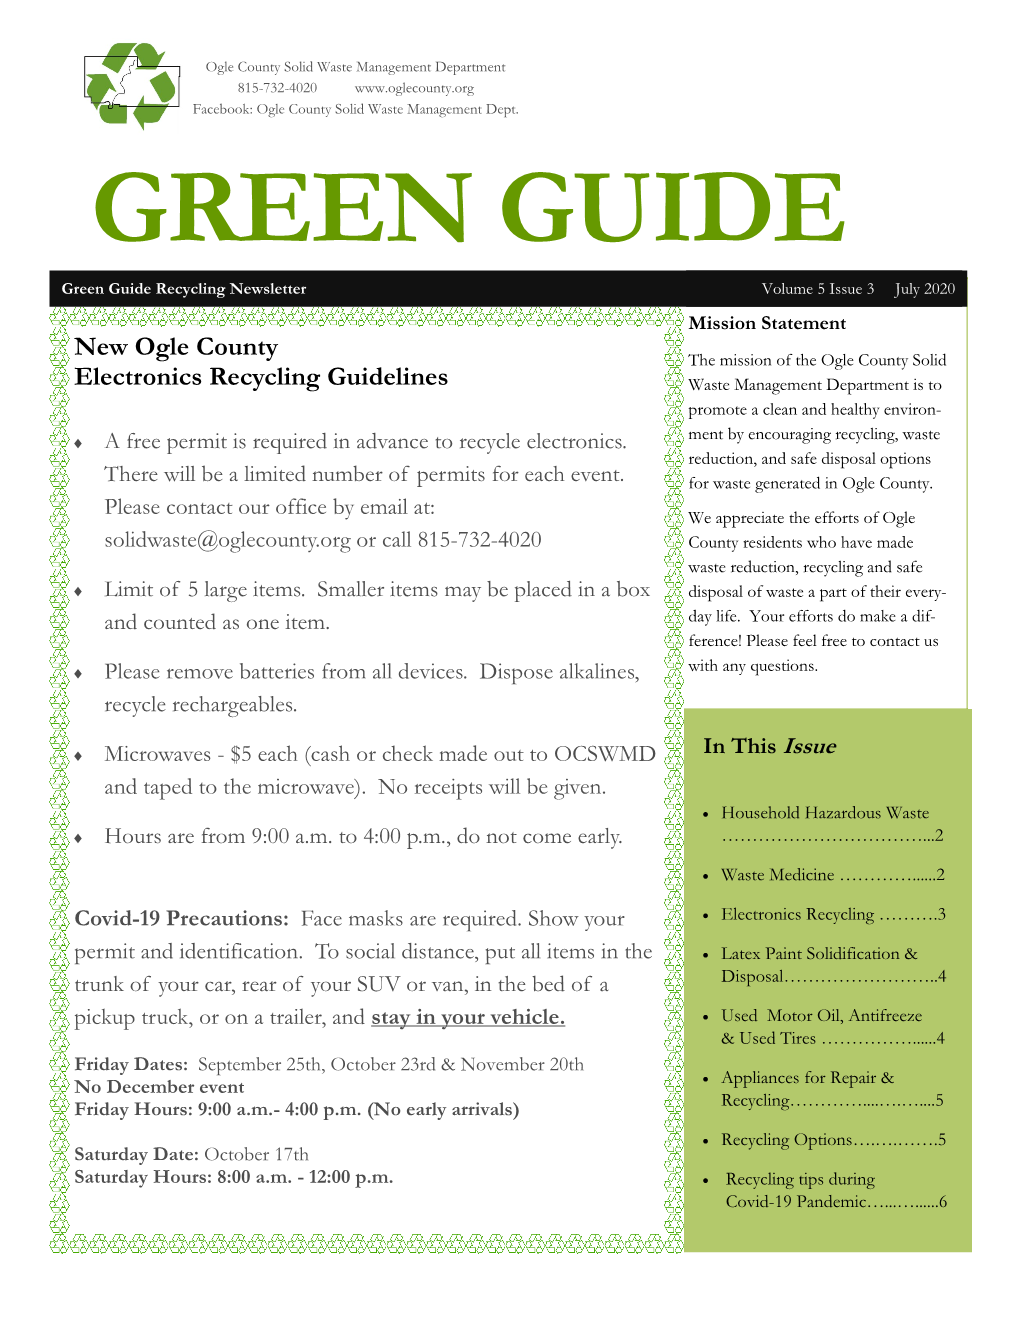 GREEN GUIDE Green Guide Recycling Newsletter Volume 5 Issue 3 July 2020 Mission Statement